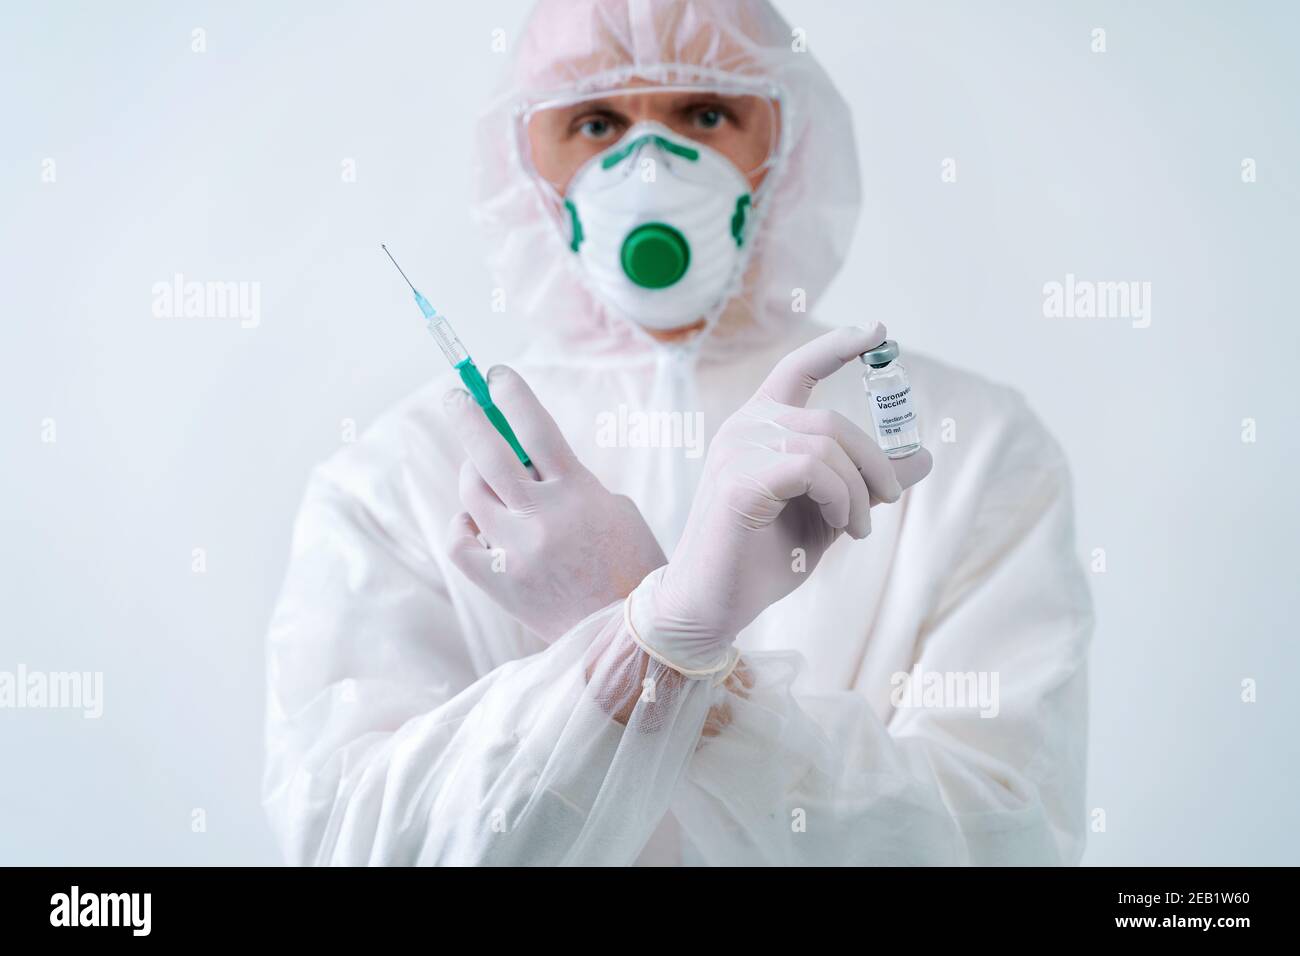 Man in protective suit and mask holds an injection syringe and vaccine. Biological hazard. Stock Photo